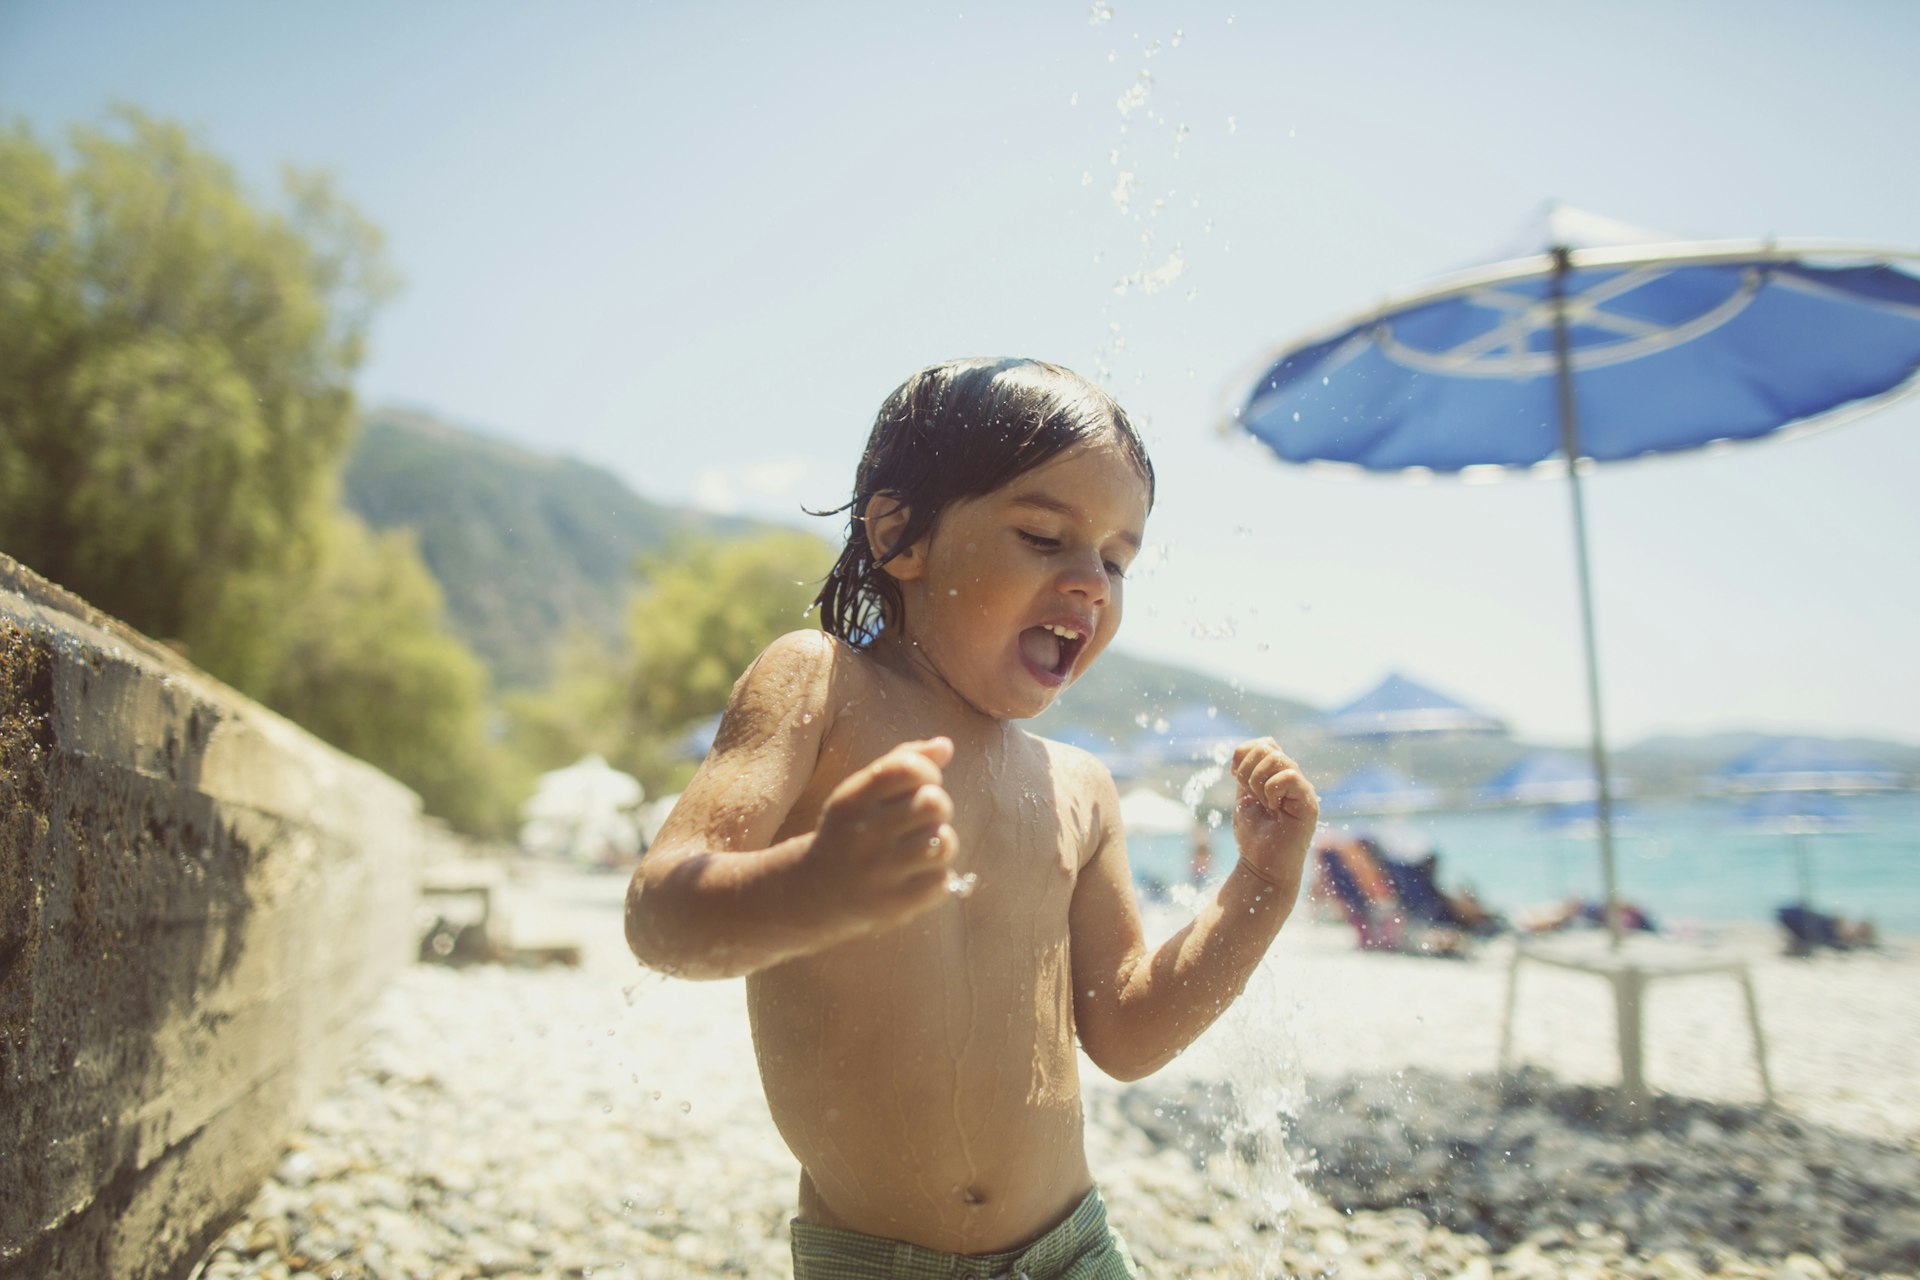 A small boy washing sand off on the beach in Greece